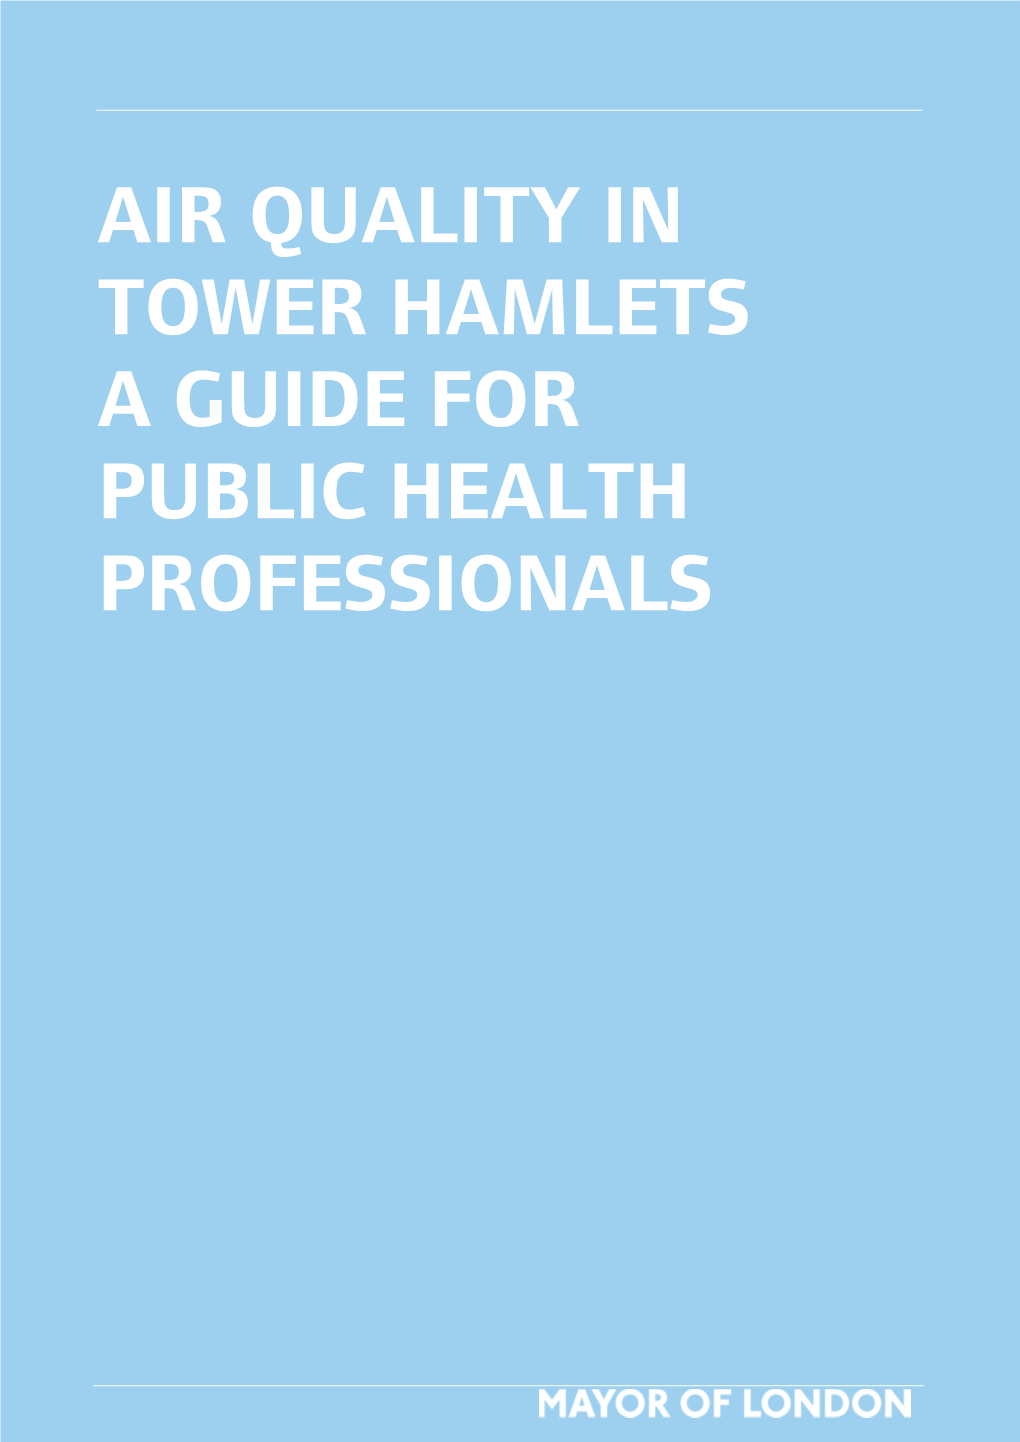 Air Quality in Tower Hamlets a Guide for Public Health